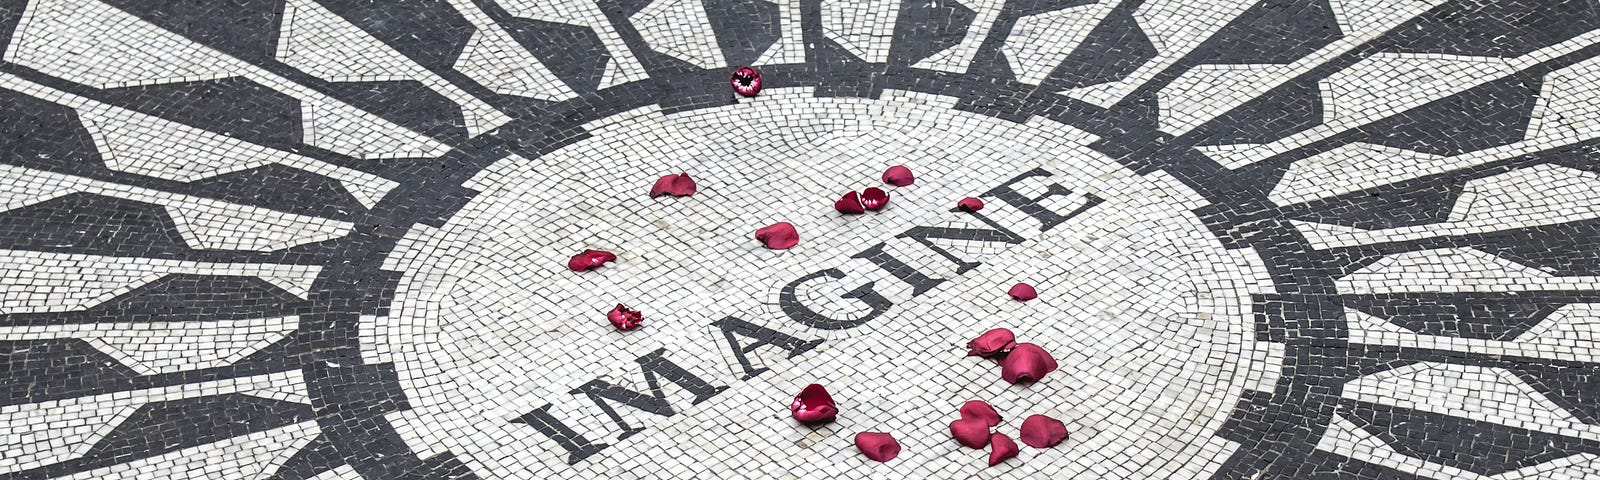 Mosaic with the word IMAGINE at its center.